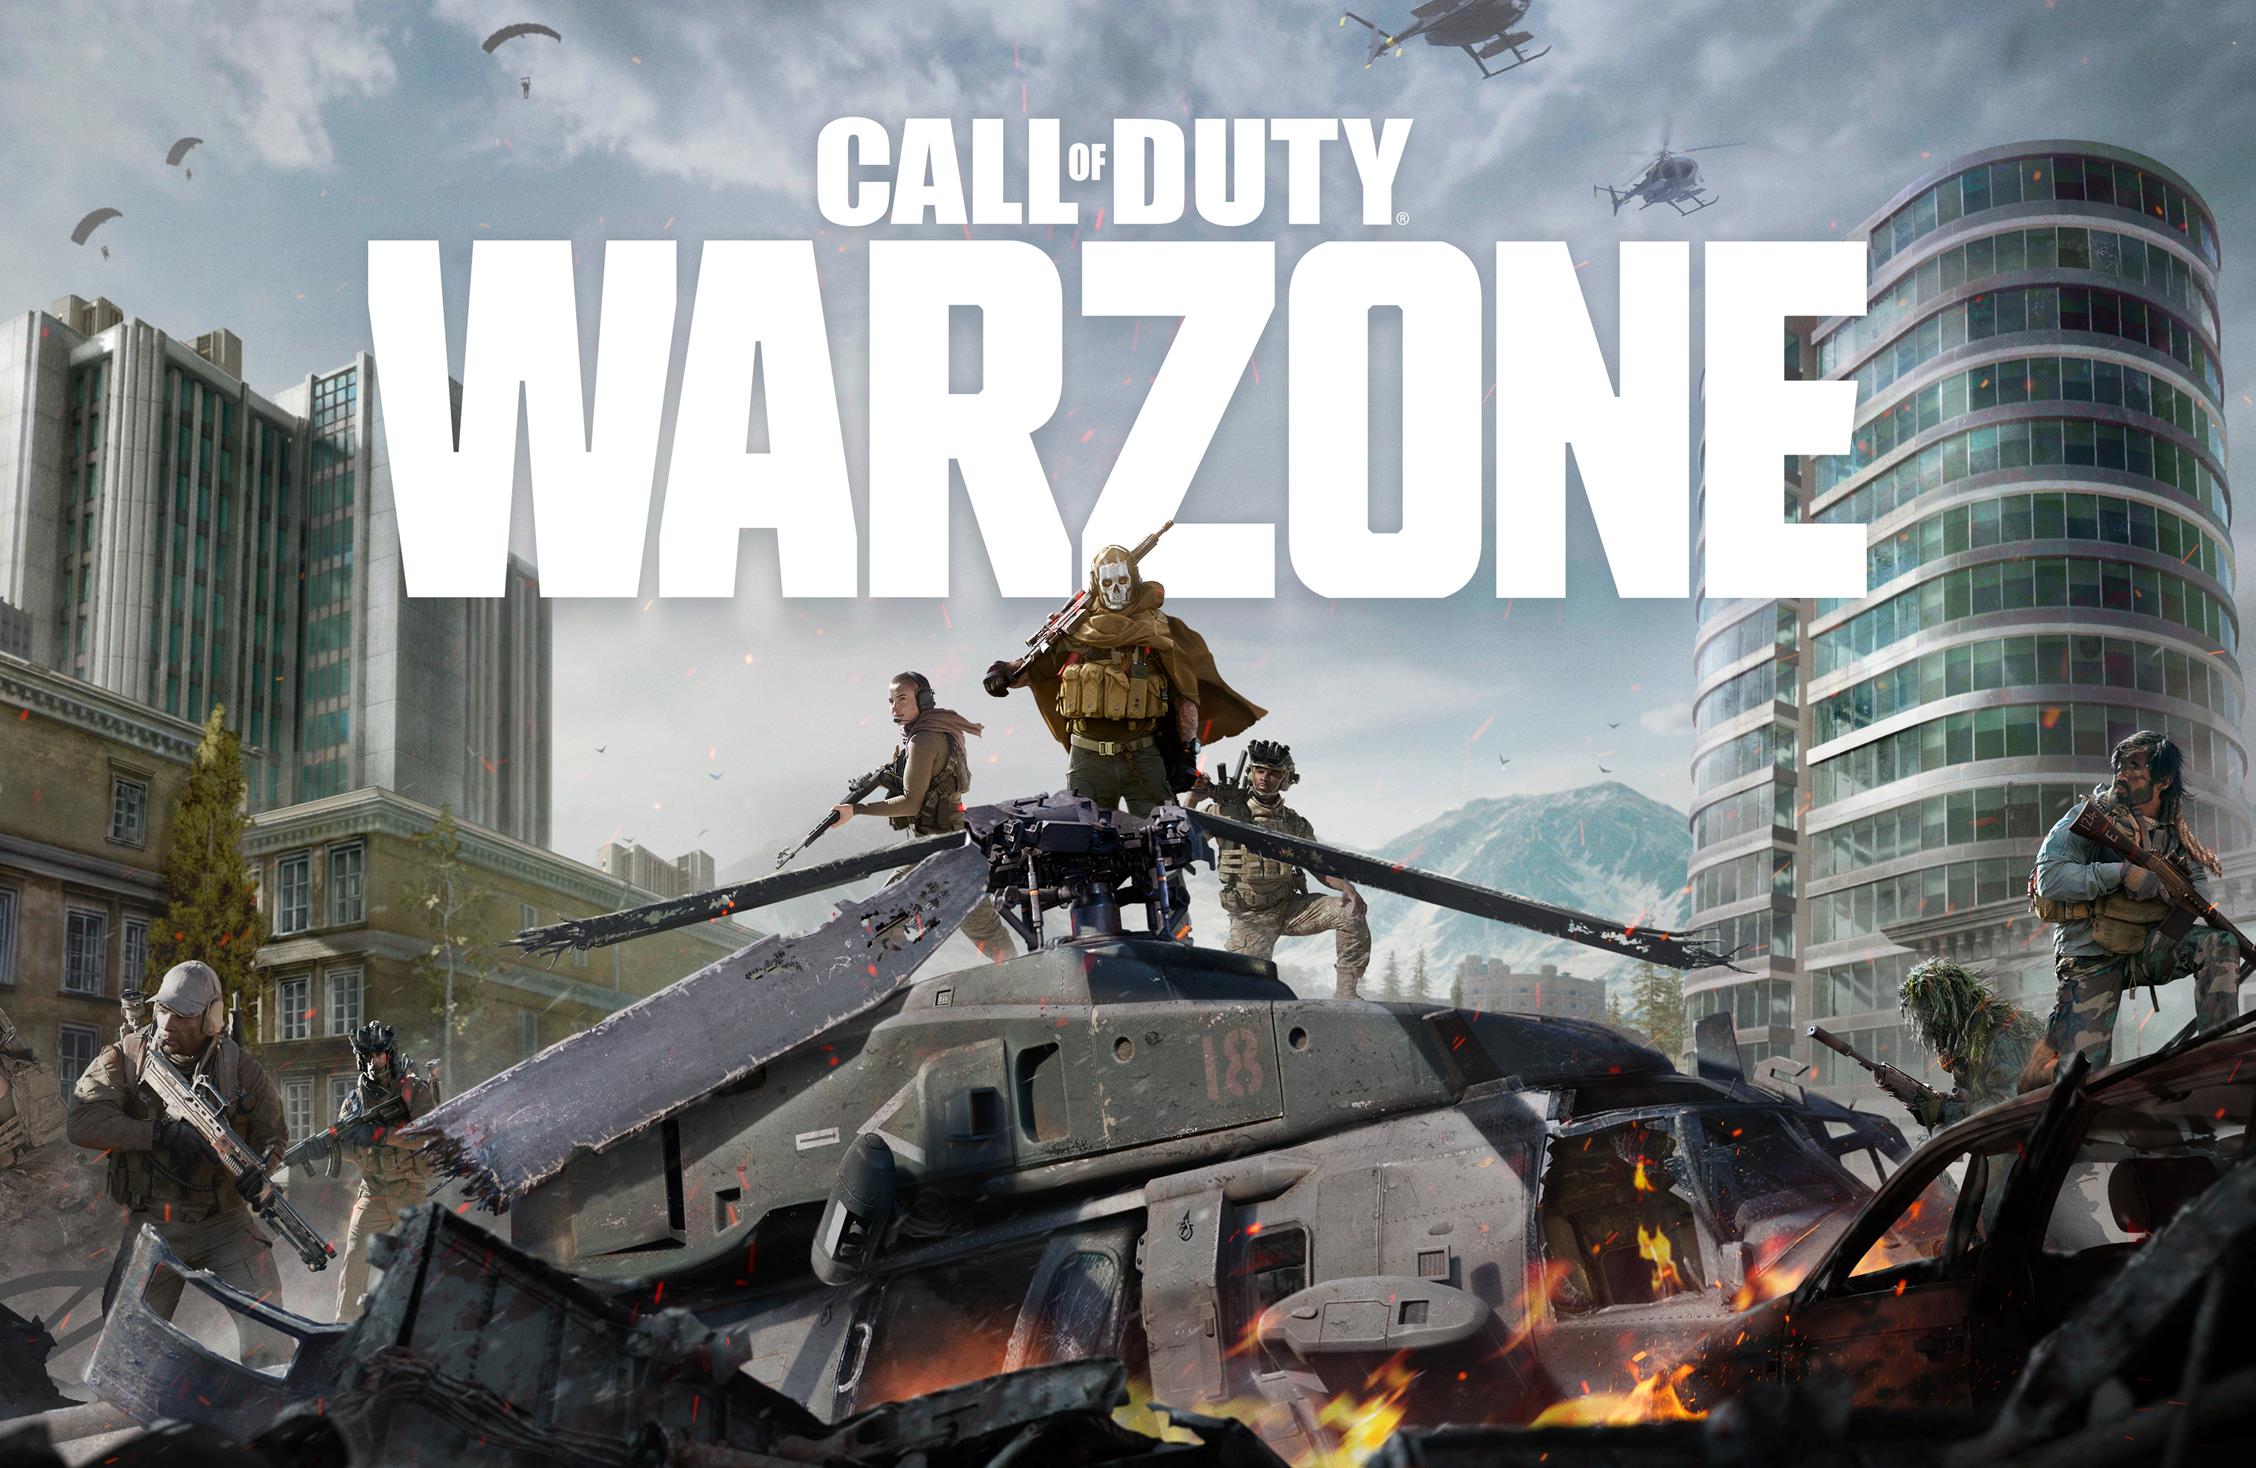 Image for Call of Duty: Warzone doesn't require PS Plus, but members get this free bonus